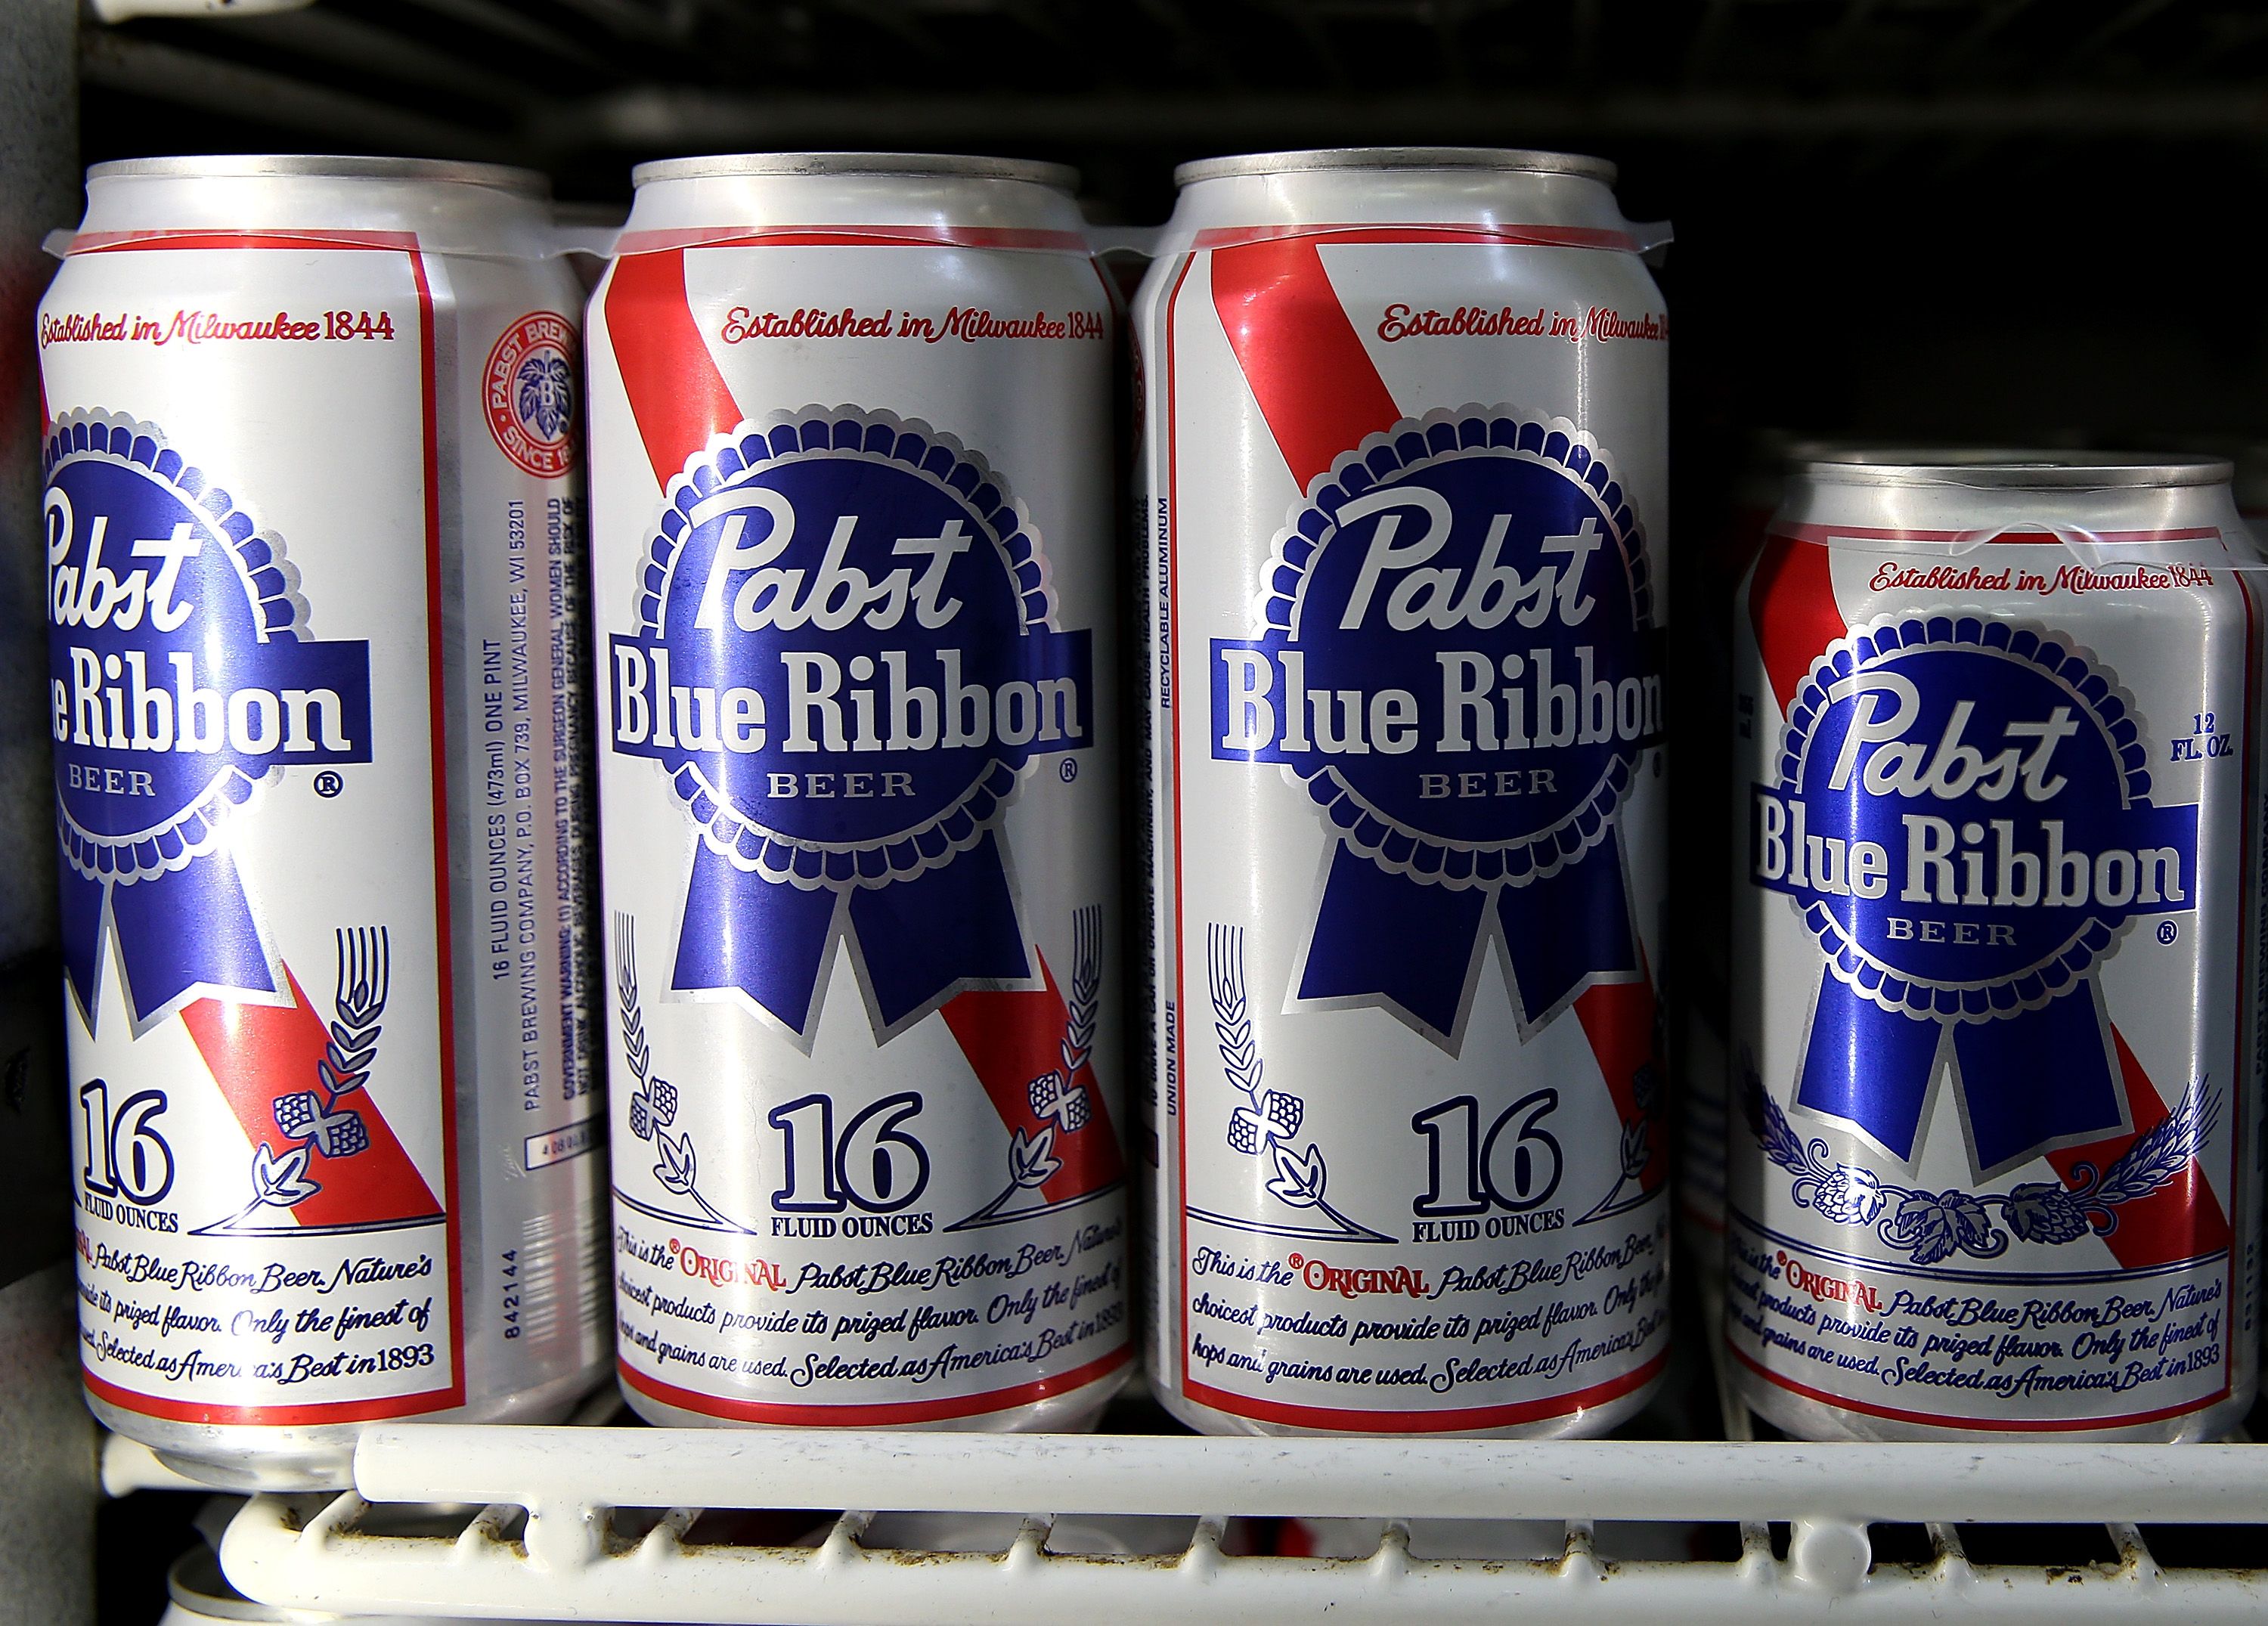 cans-of-pabst-blue-ribbon-beer-sit-on-a-shelf-at-a-news-photo-455929036-1542141647.jpg